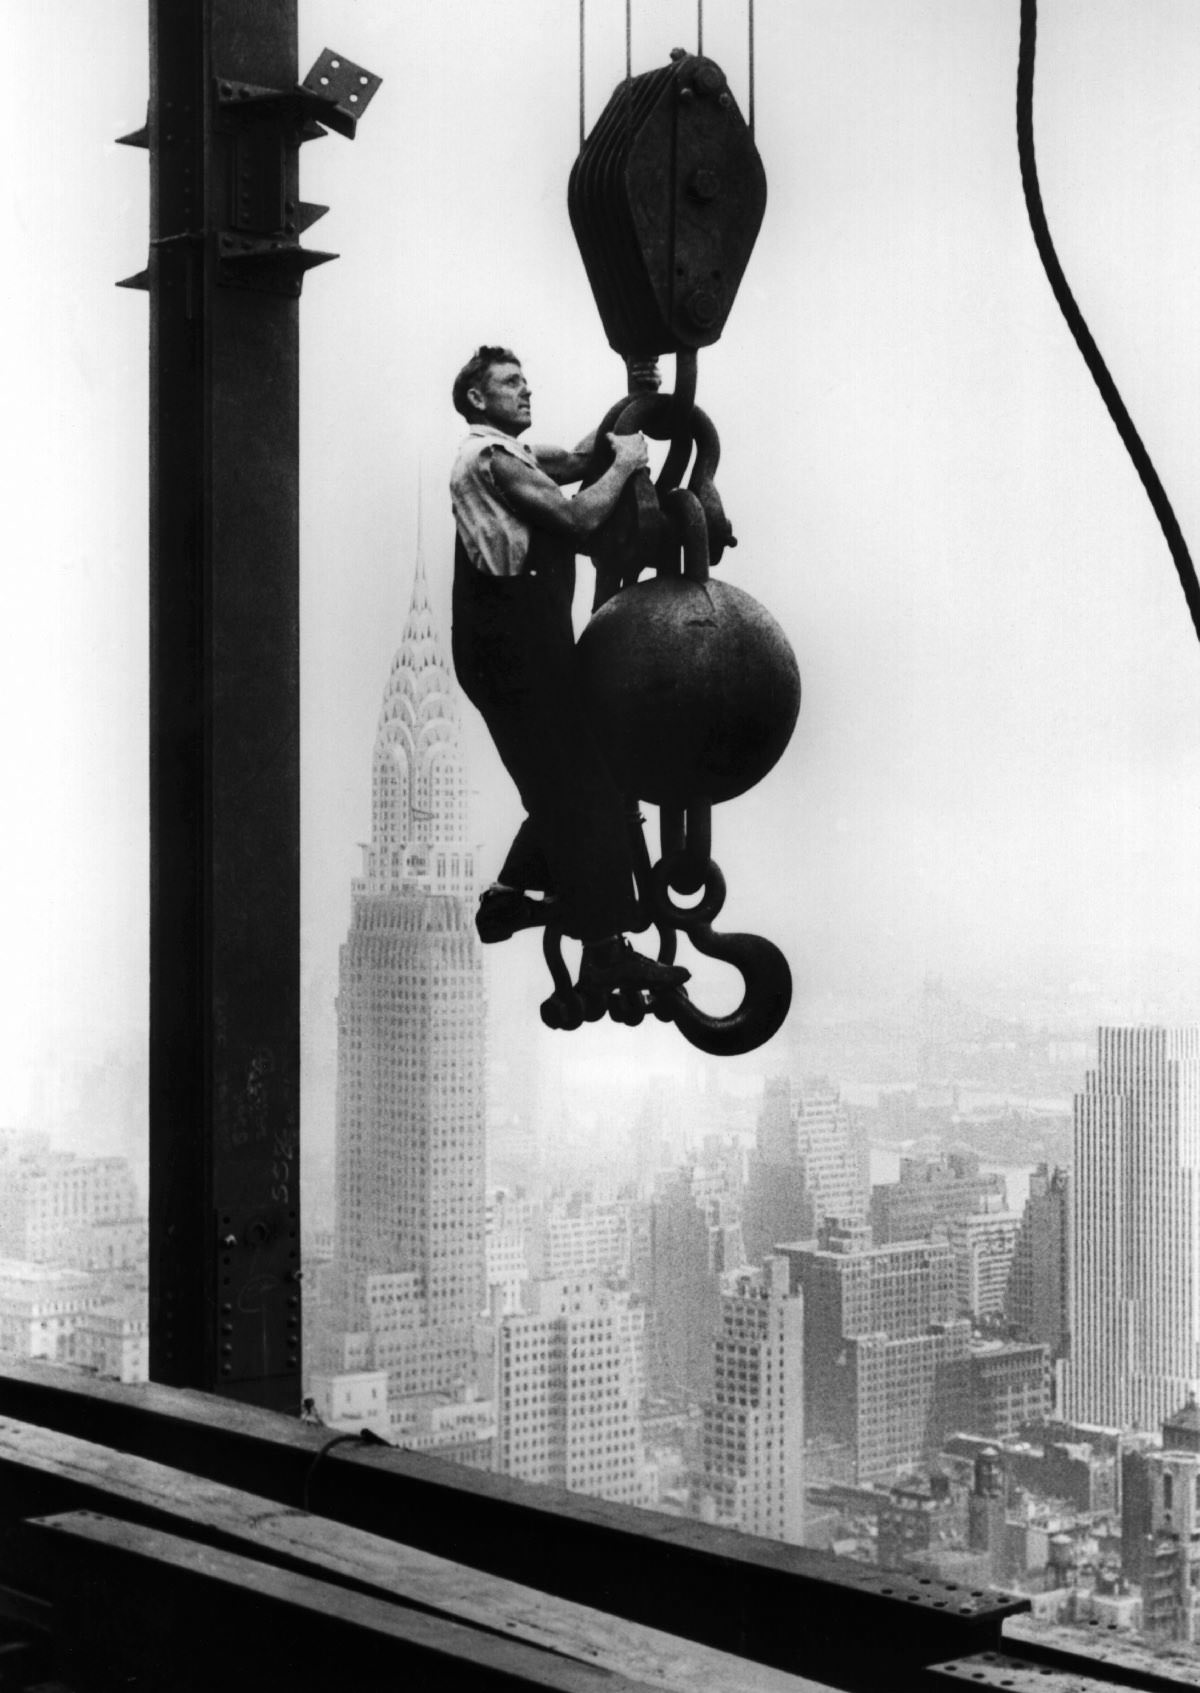 A construction worker hangs from an industrial crane during the construction of the Empire State Building. Oct. 29, 1930